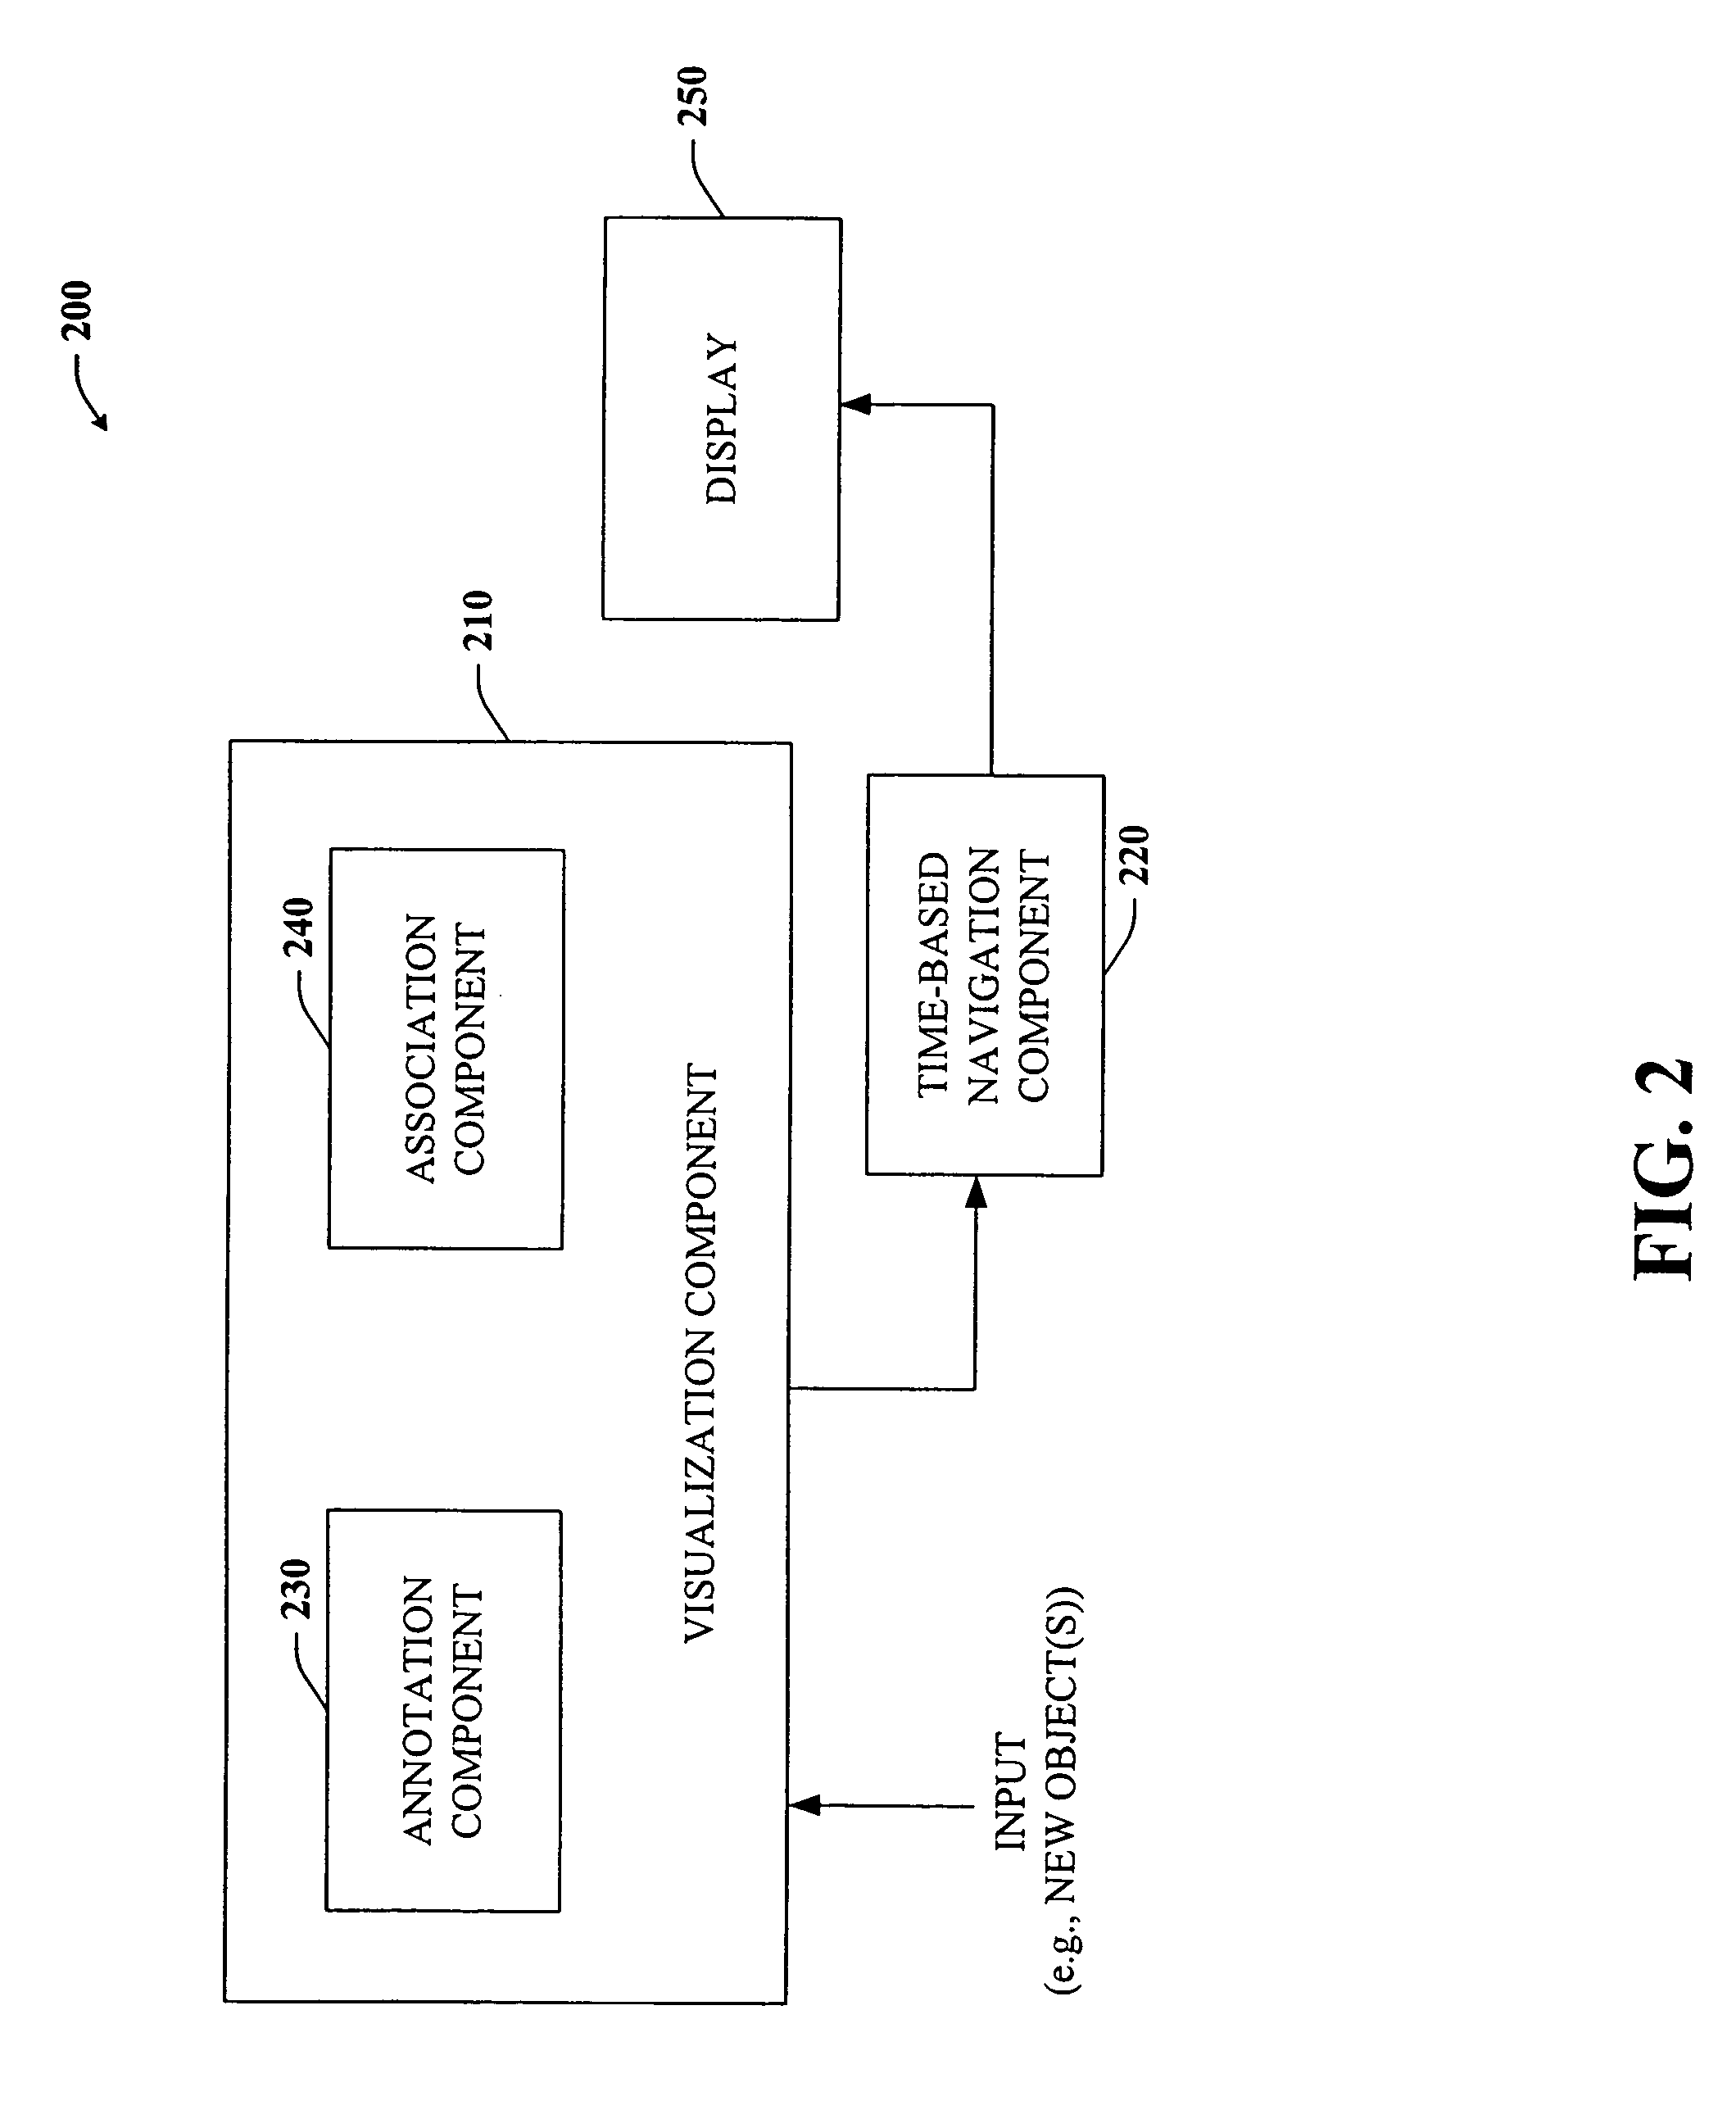 File management system employing time line based representation of data